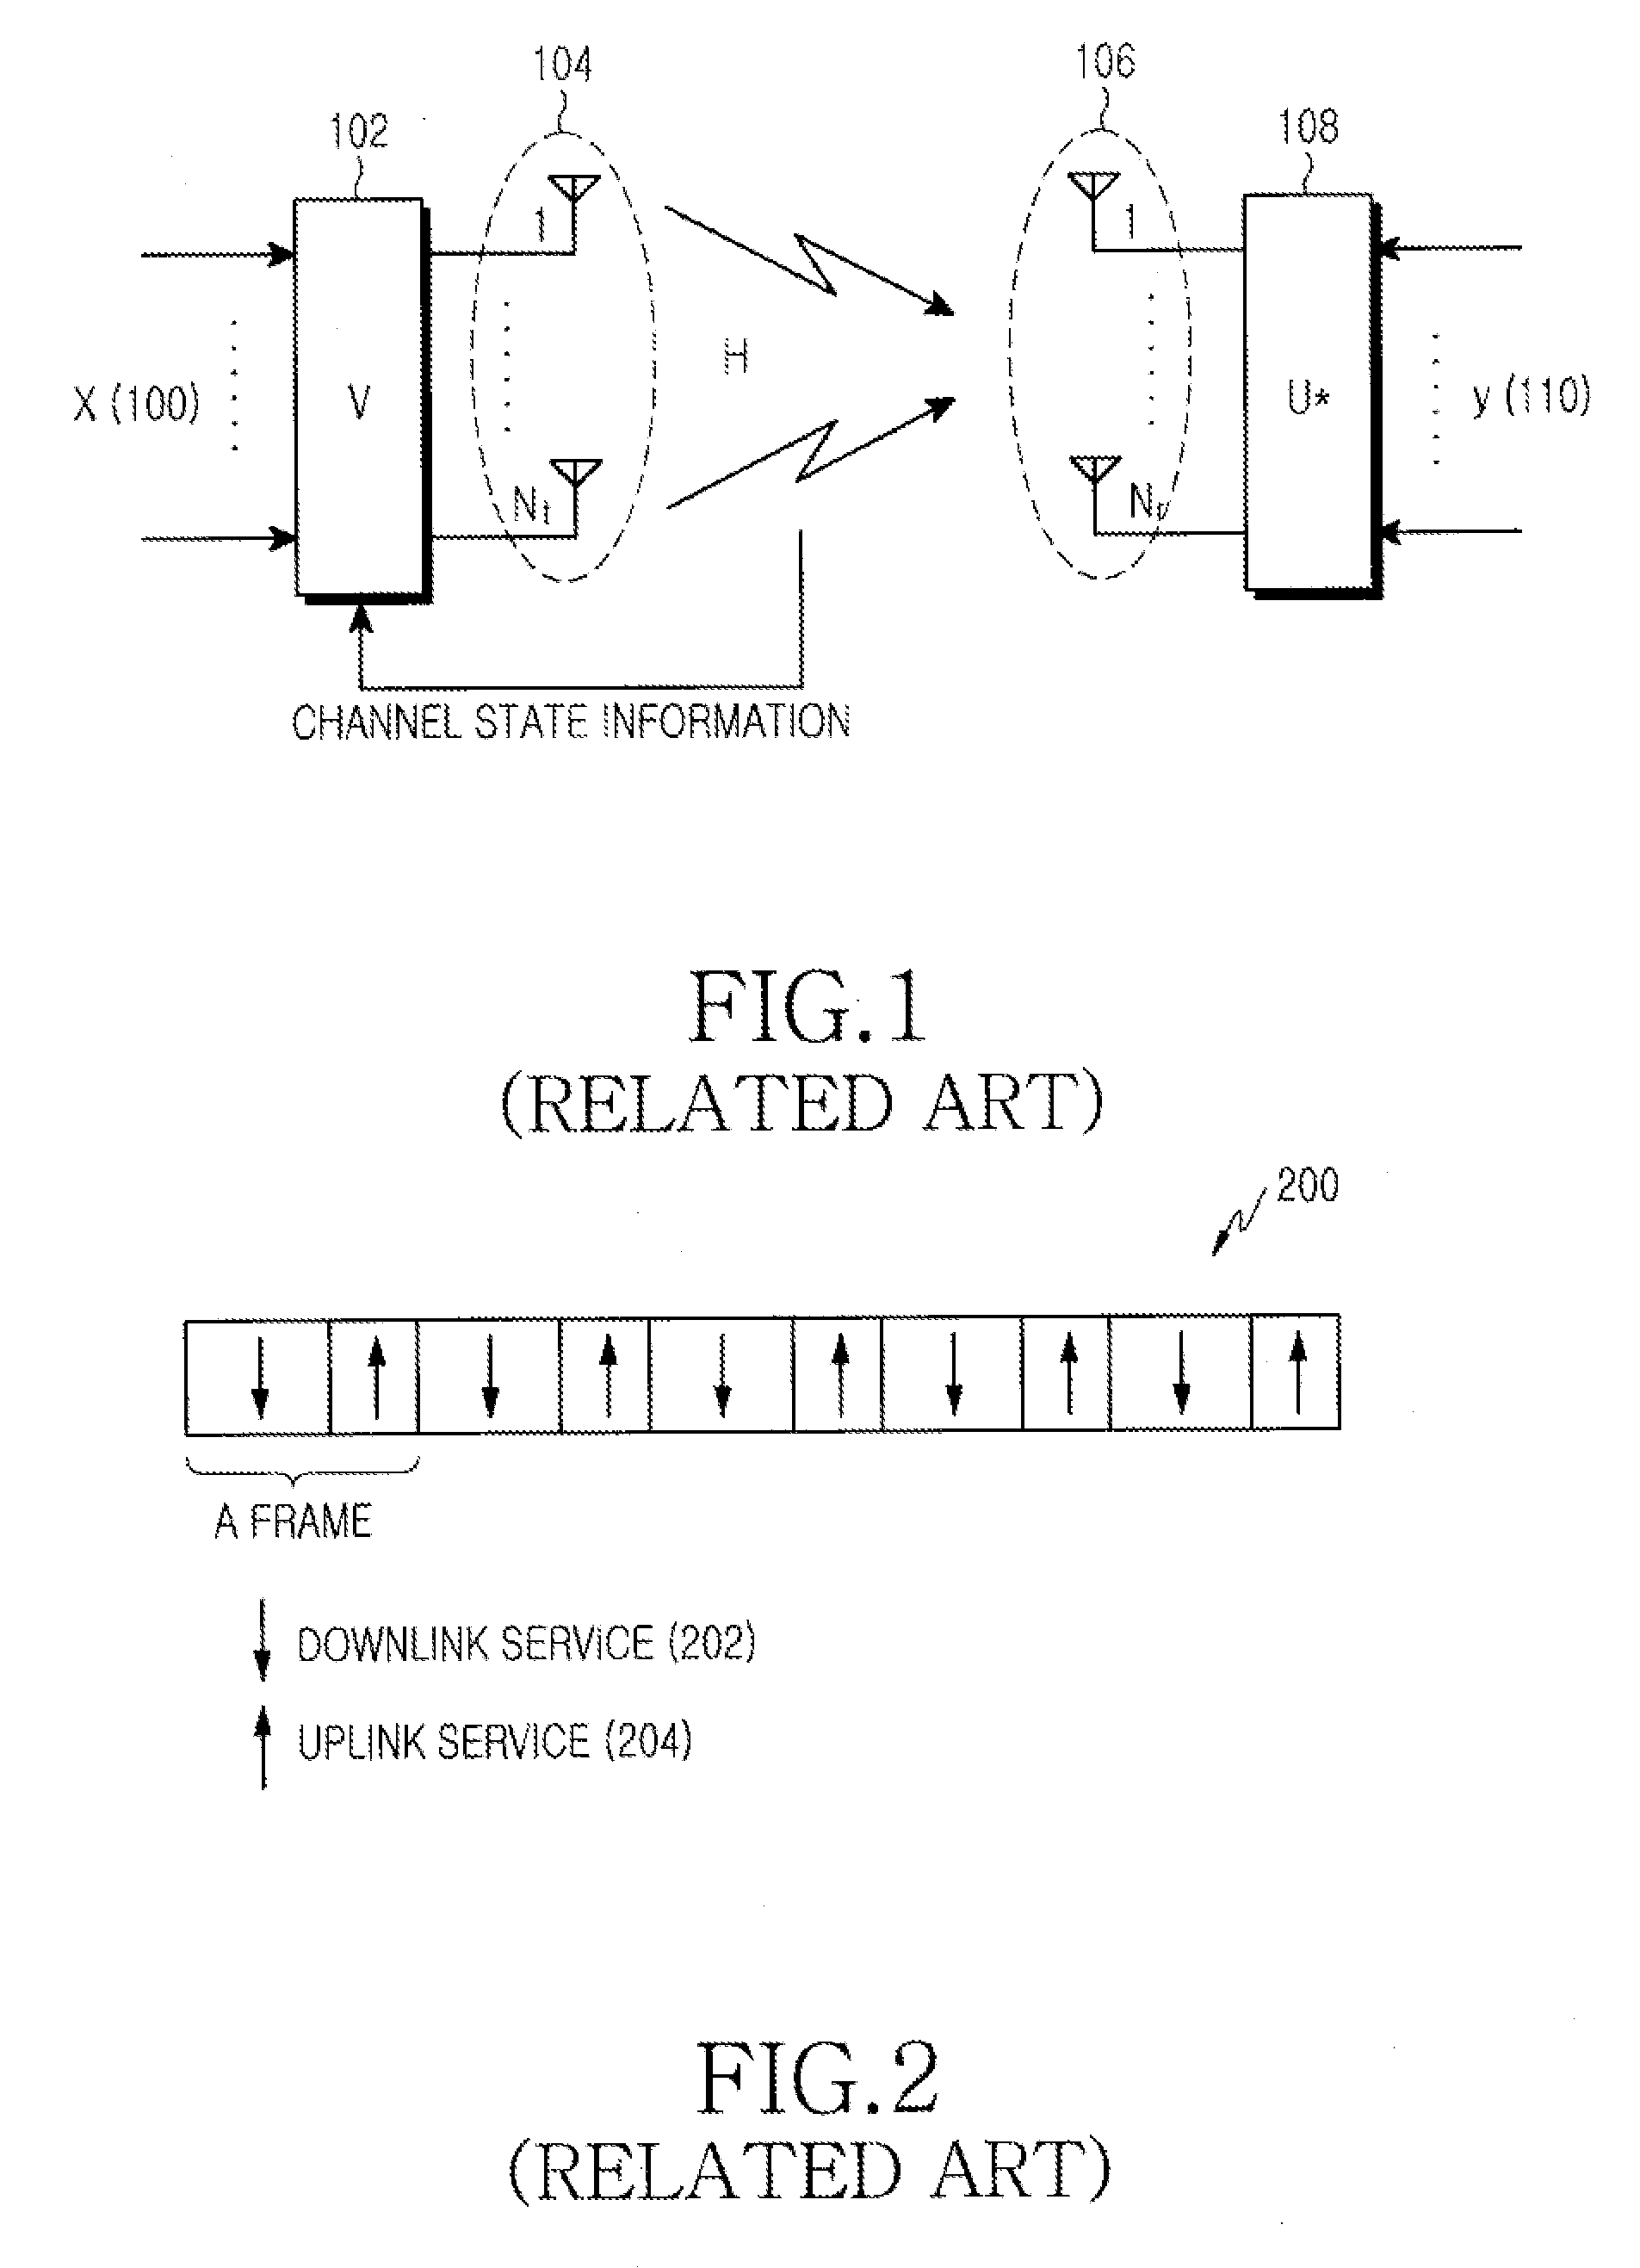 Pre-coding/pre-decoding method and apparatus for data transmission in mobile communication system